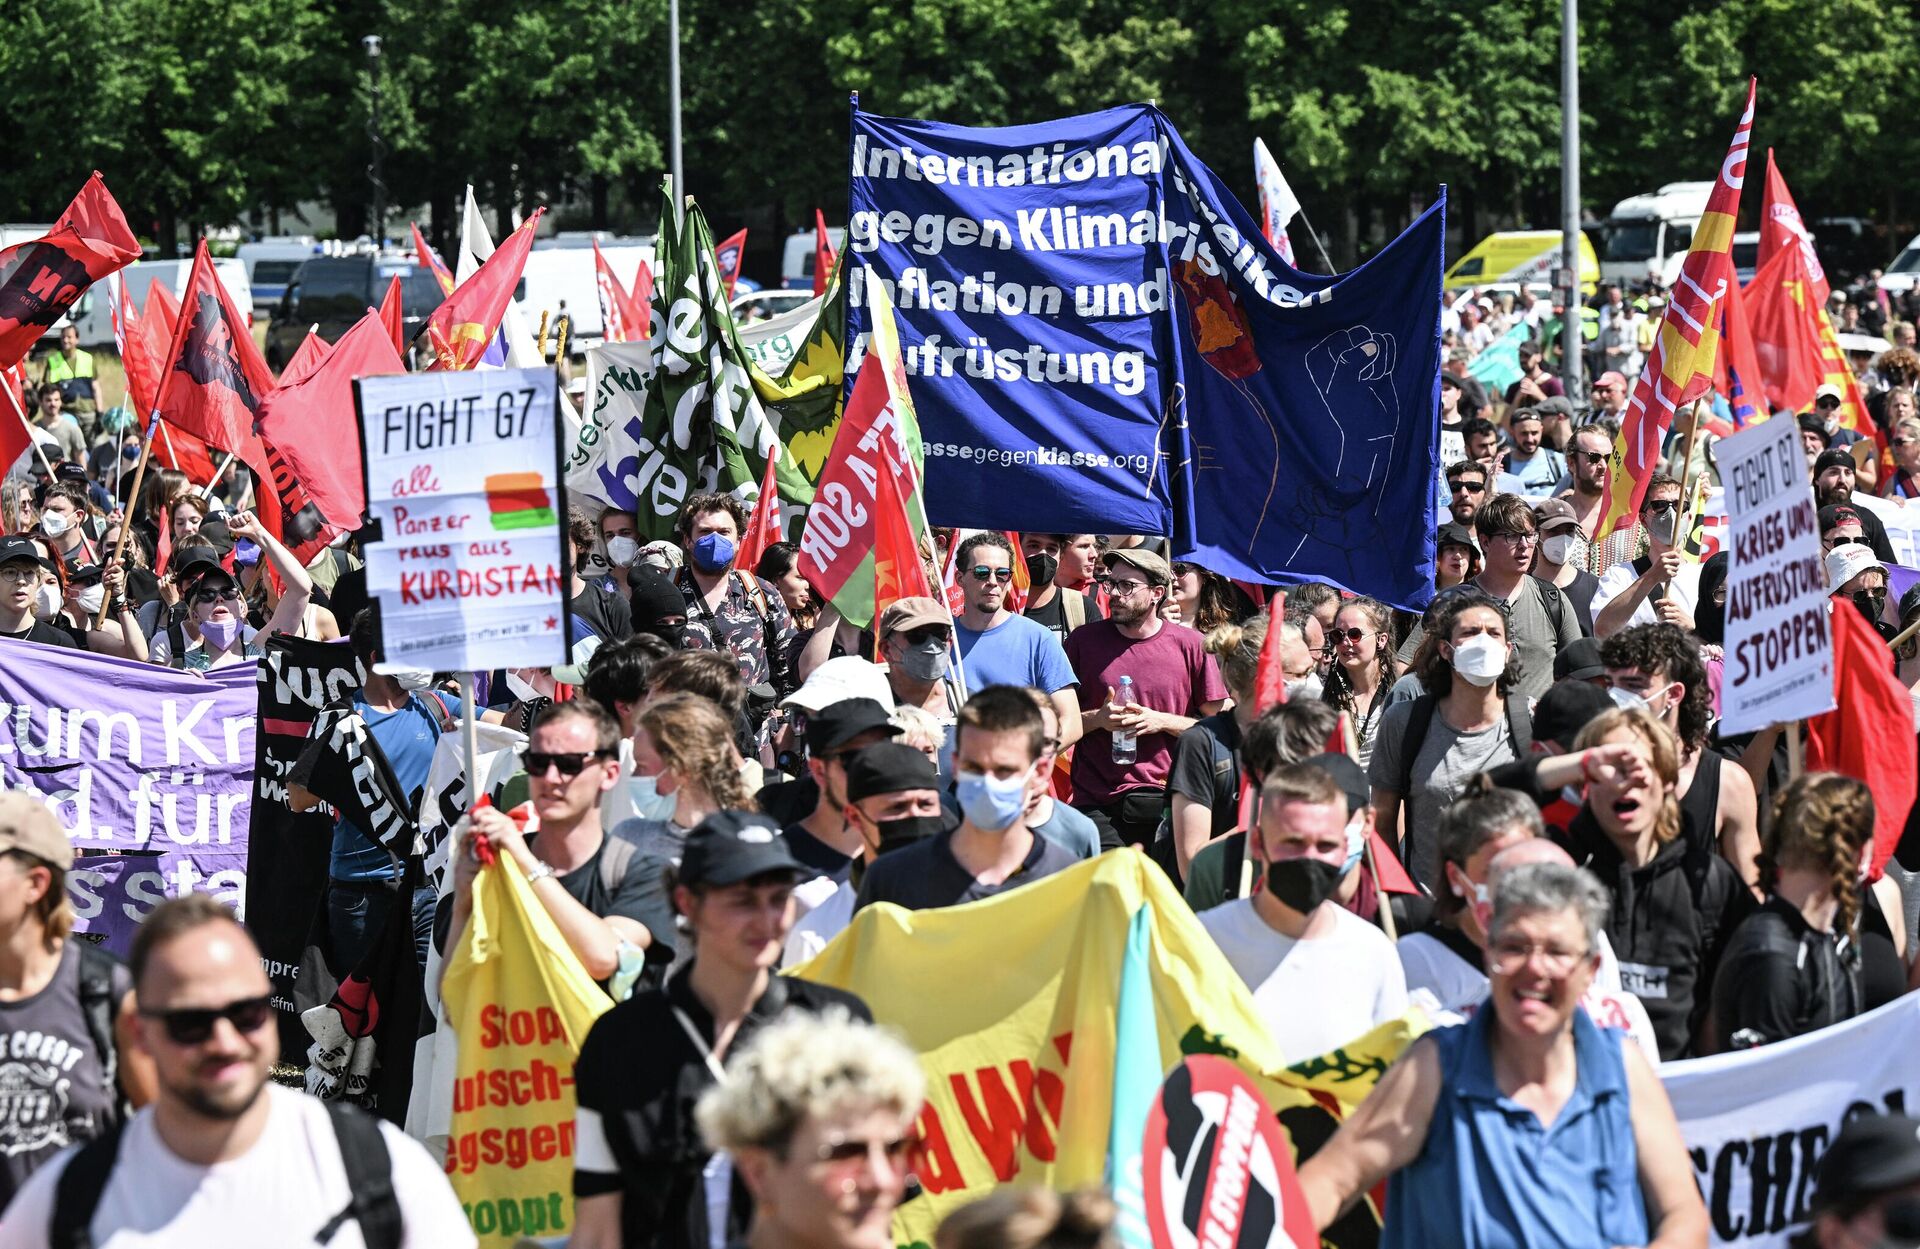 Protesters take part in demonstration called for by Greenpeace, Attac and other organisations ahead of the G7 Summit at the Theresienwiese in Munich, southern Germany on June 25, 2022.  - Sputnik International, 1920, 25.06.2022